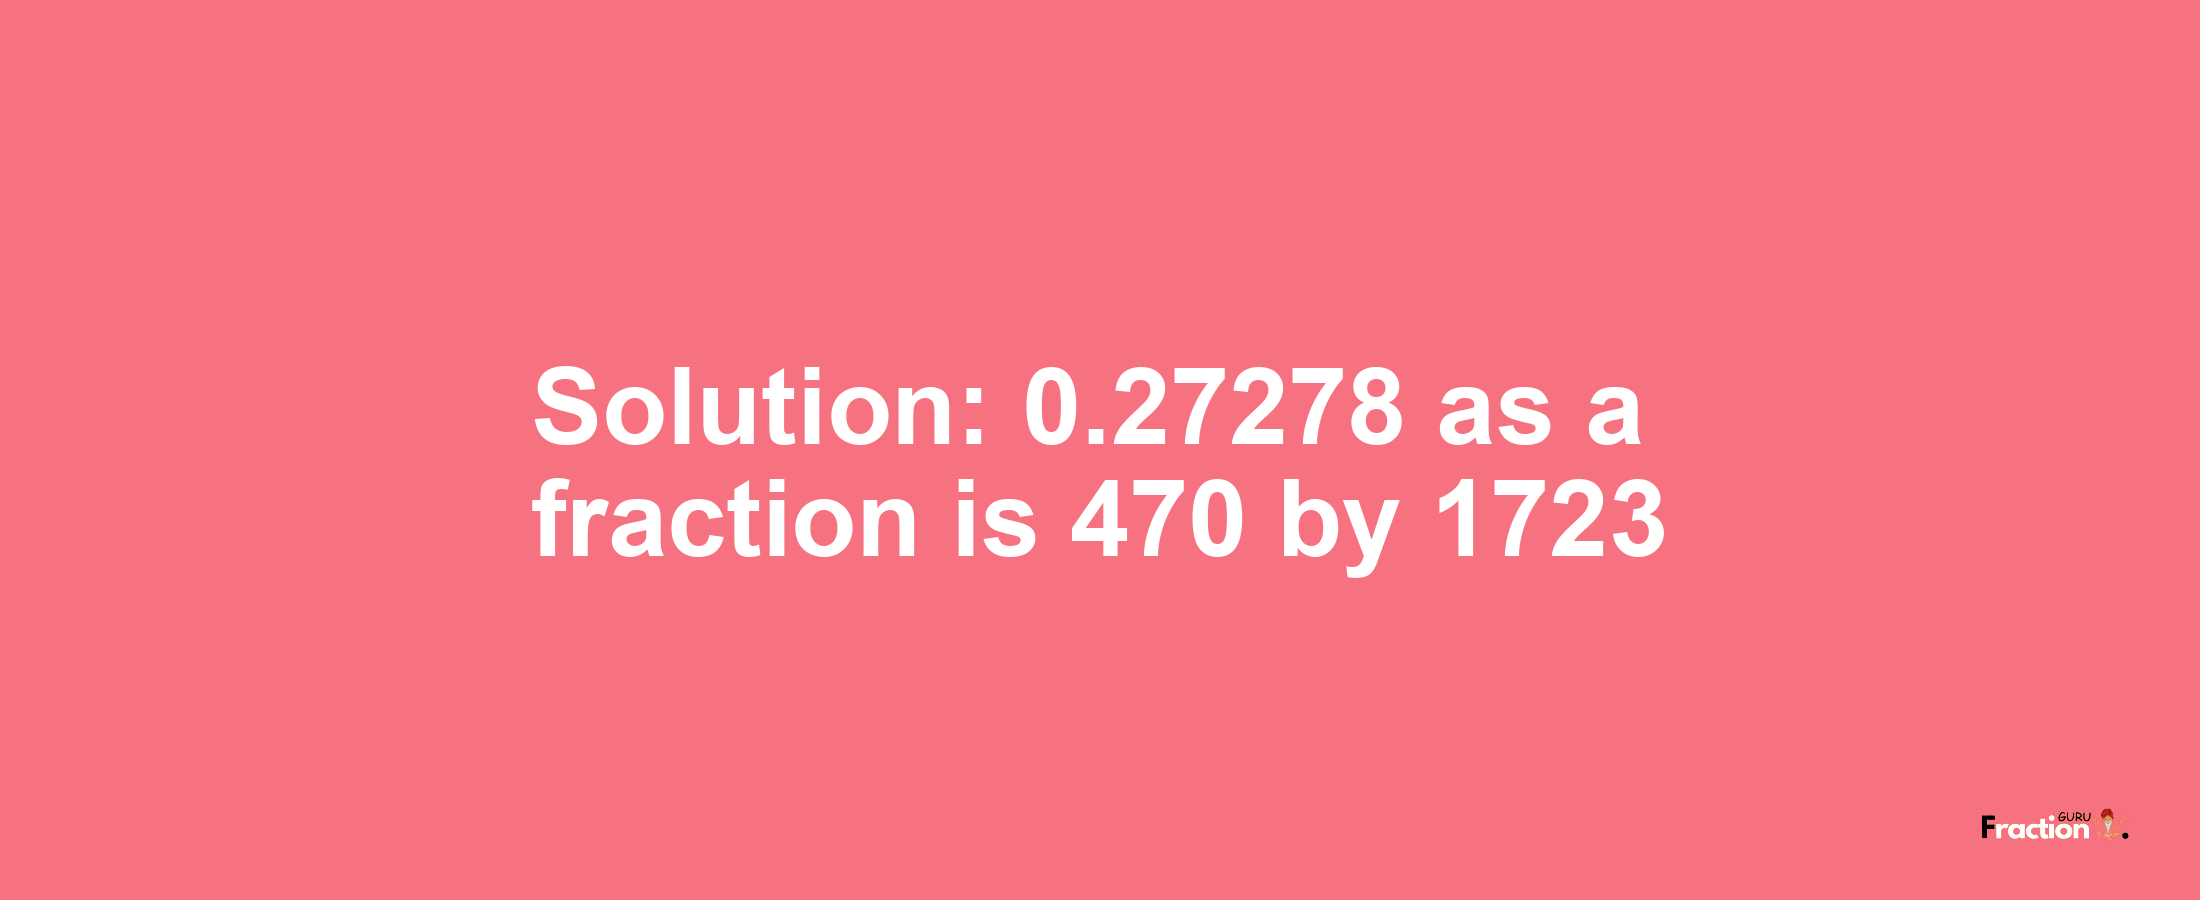 Solution:0.27278 as a fraction is 470/1723